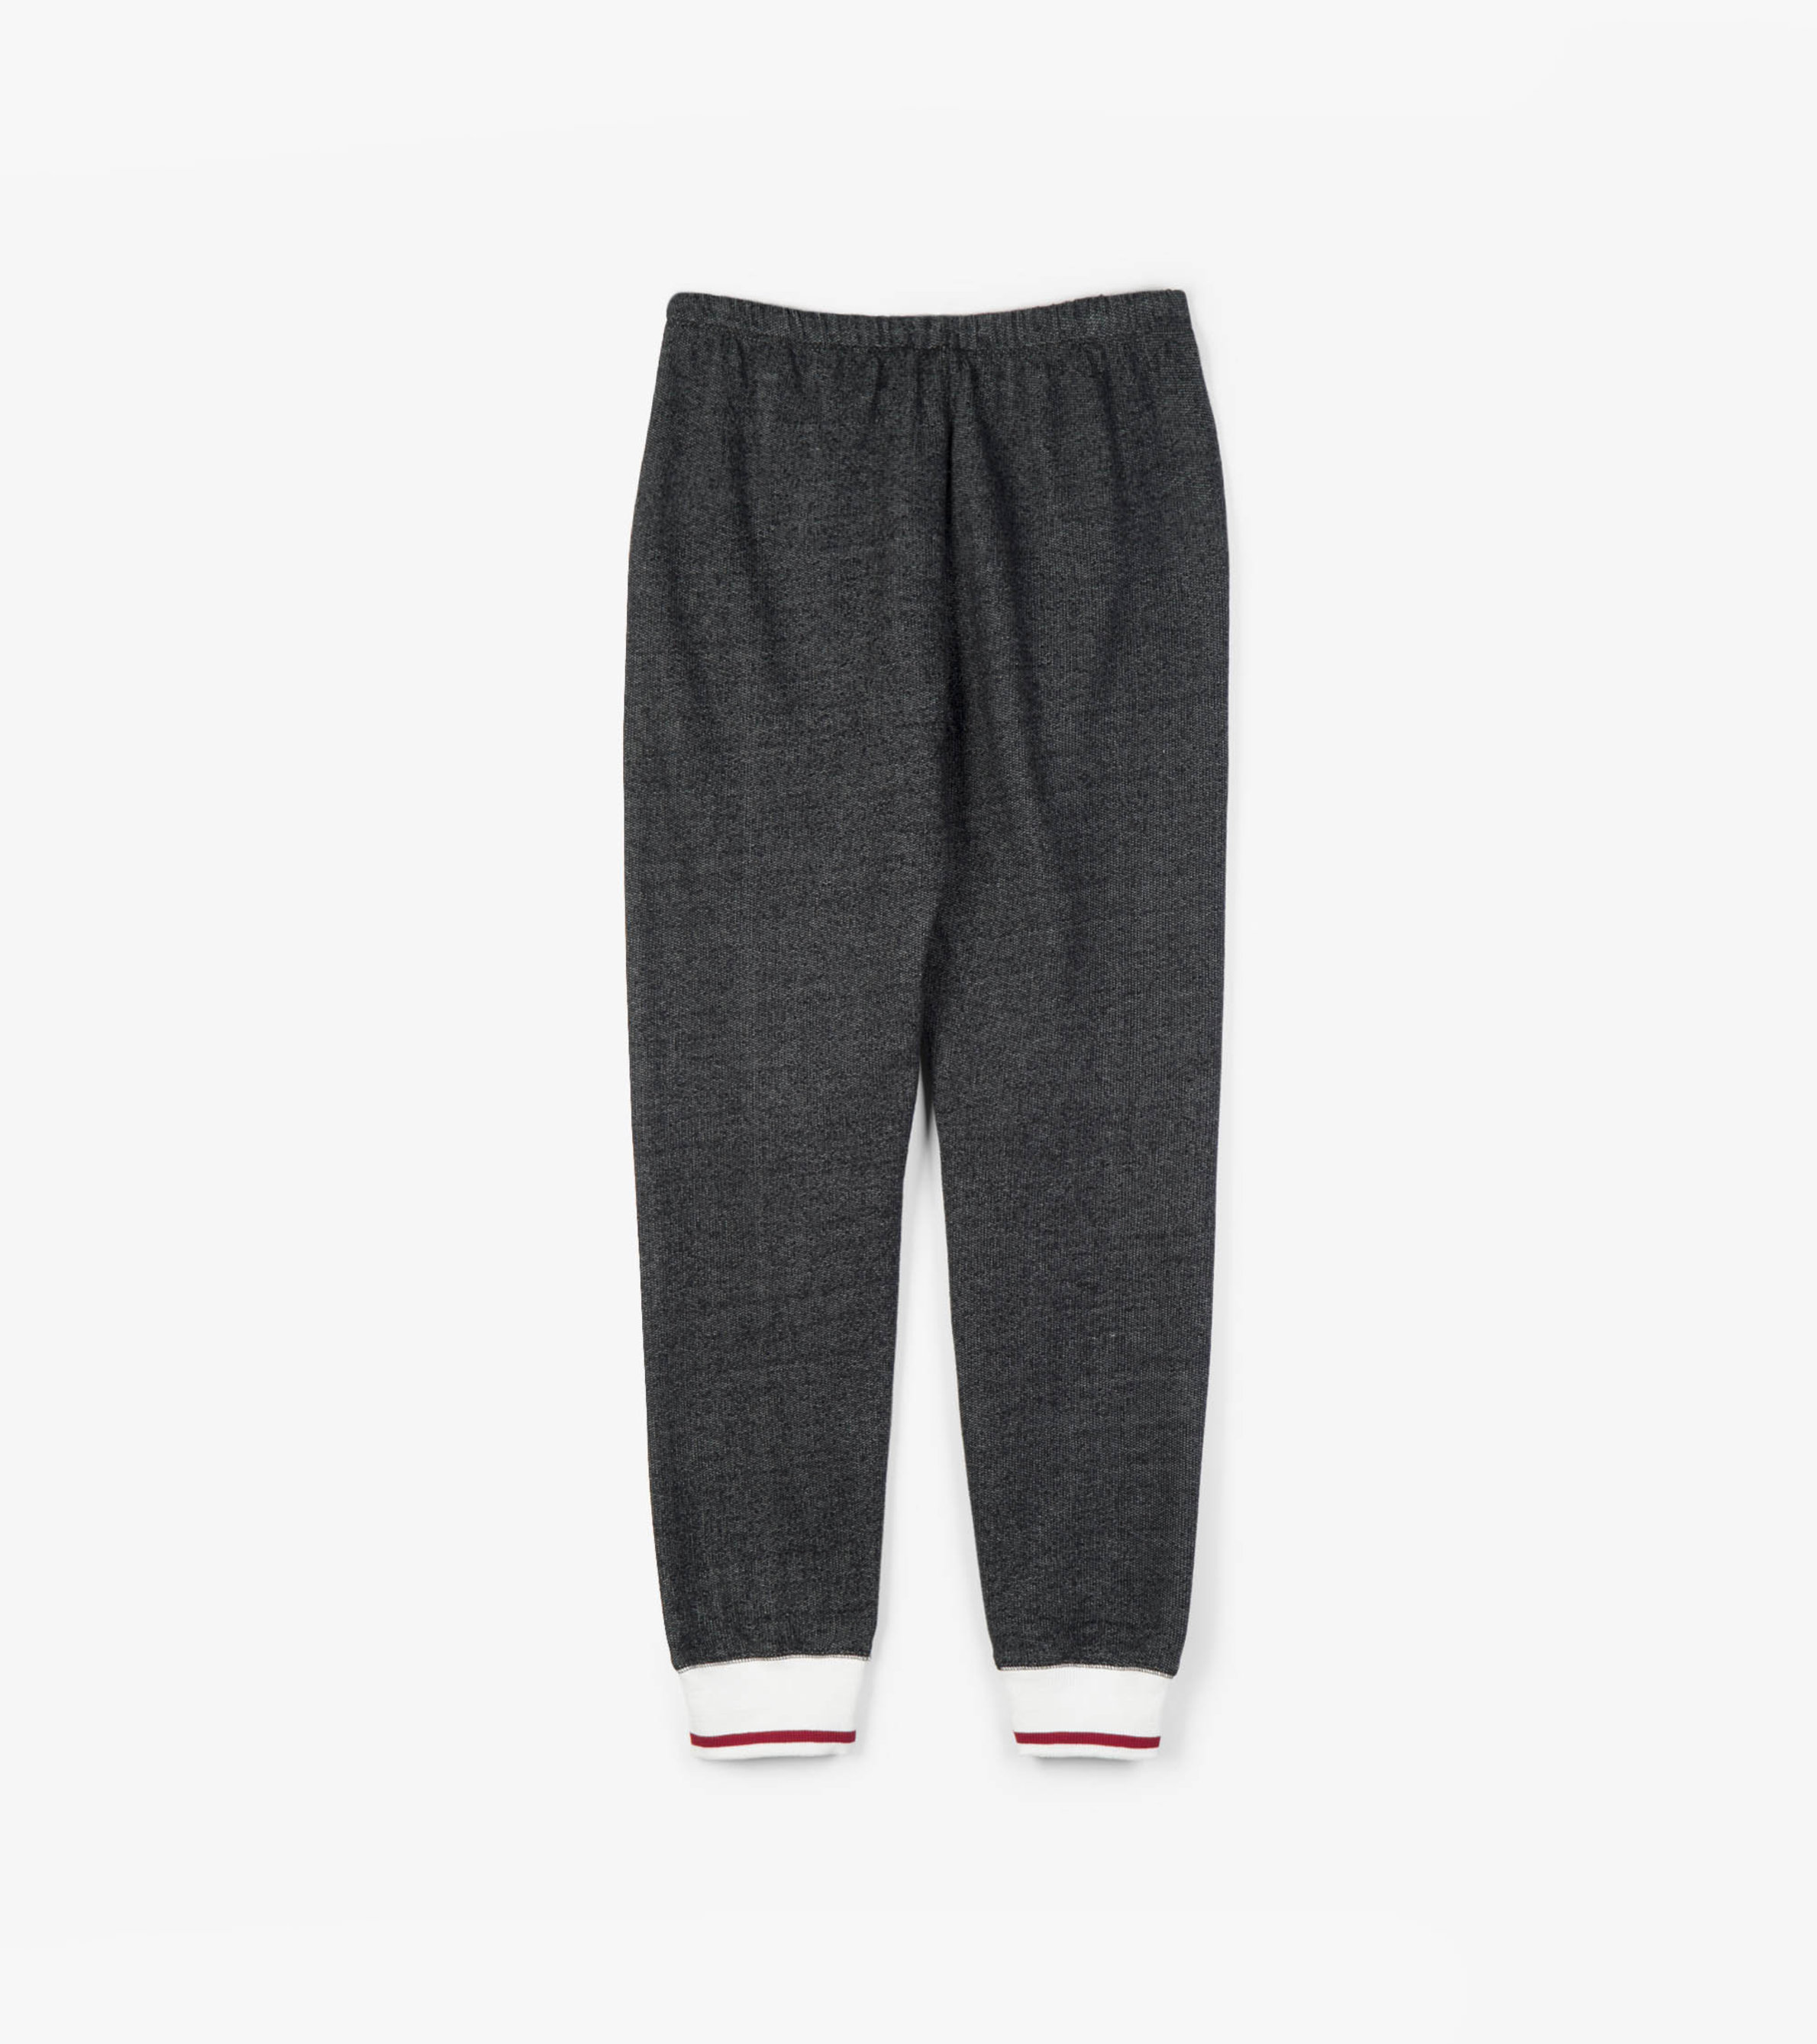 Cotton Heritage M7580 PREMIUM JOGGER Pants - From $16.07